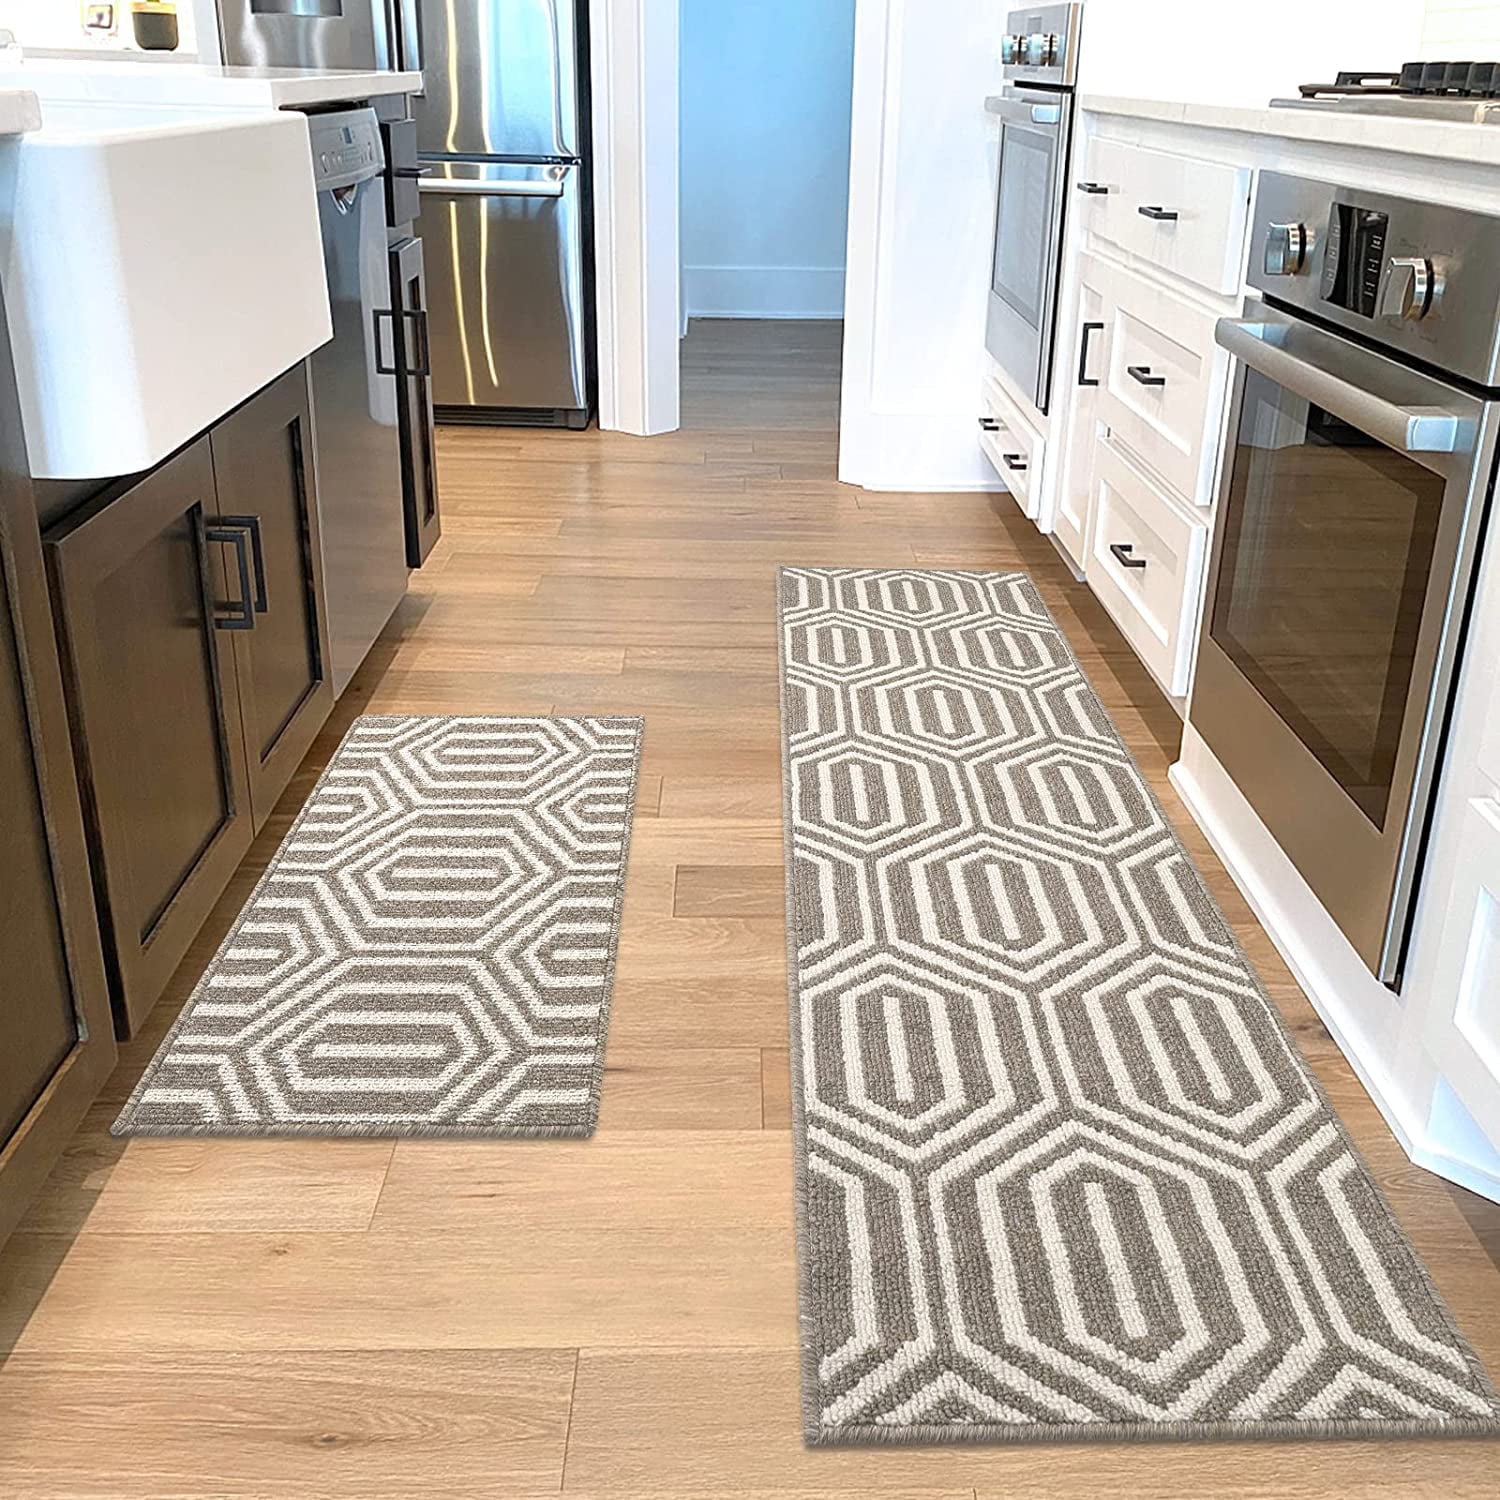 Machine Washable Carpet 20”x32” Non-Slip Absorbent Kitchen Decor Mat for Kitchen Floor Premium Durable Kitchen Rug Mat Kitchen Floor Mat Entryway Hallway and Dining Room Grey Rectangle 